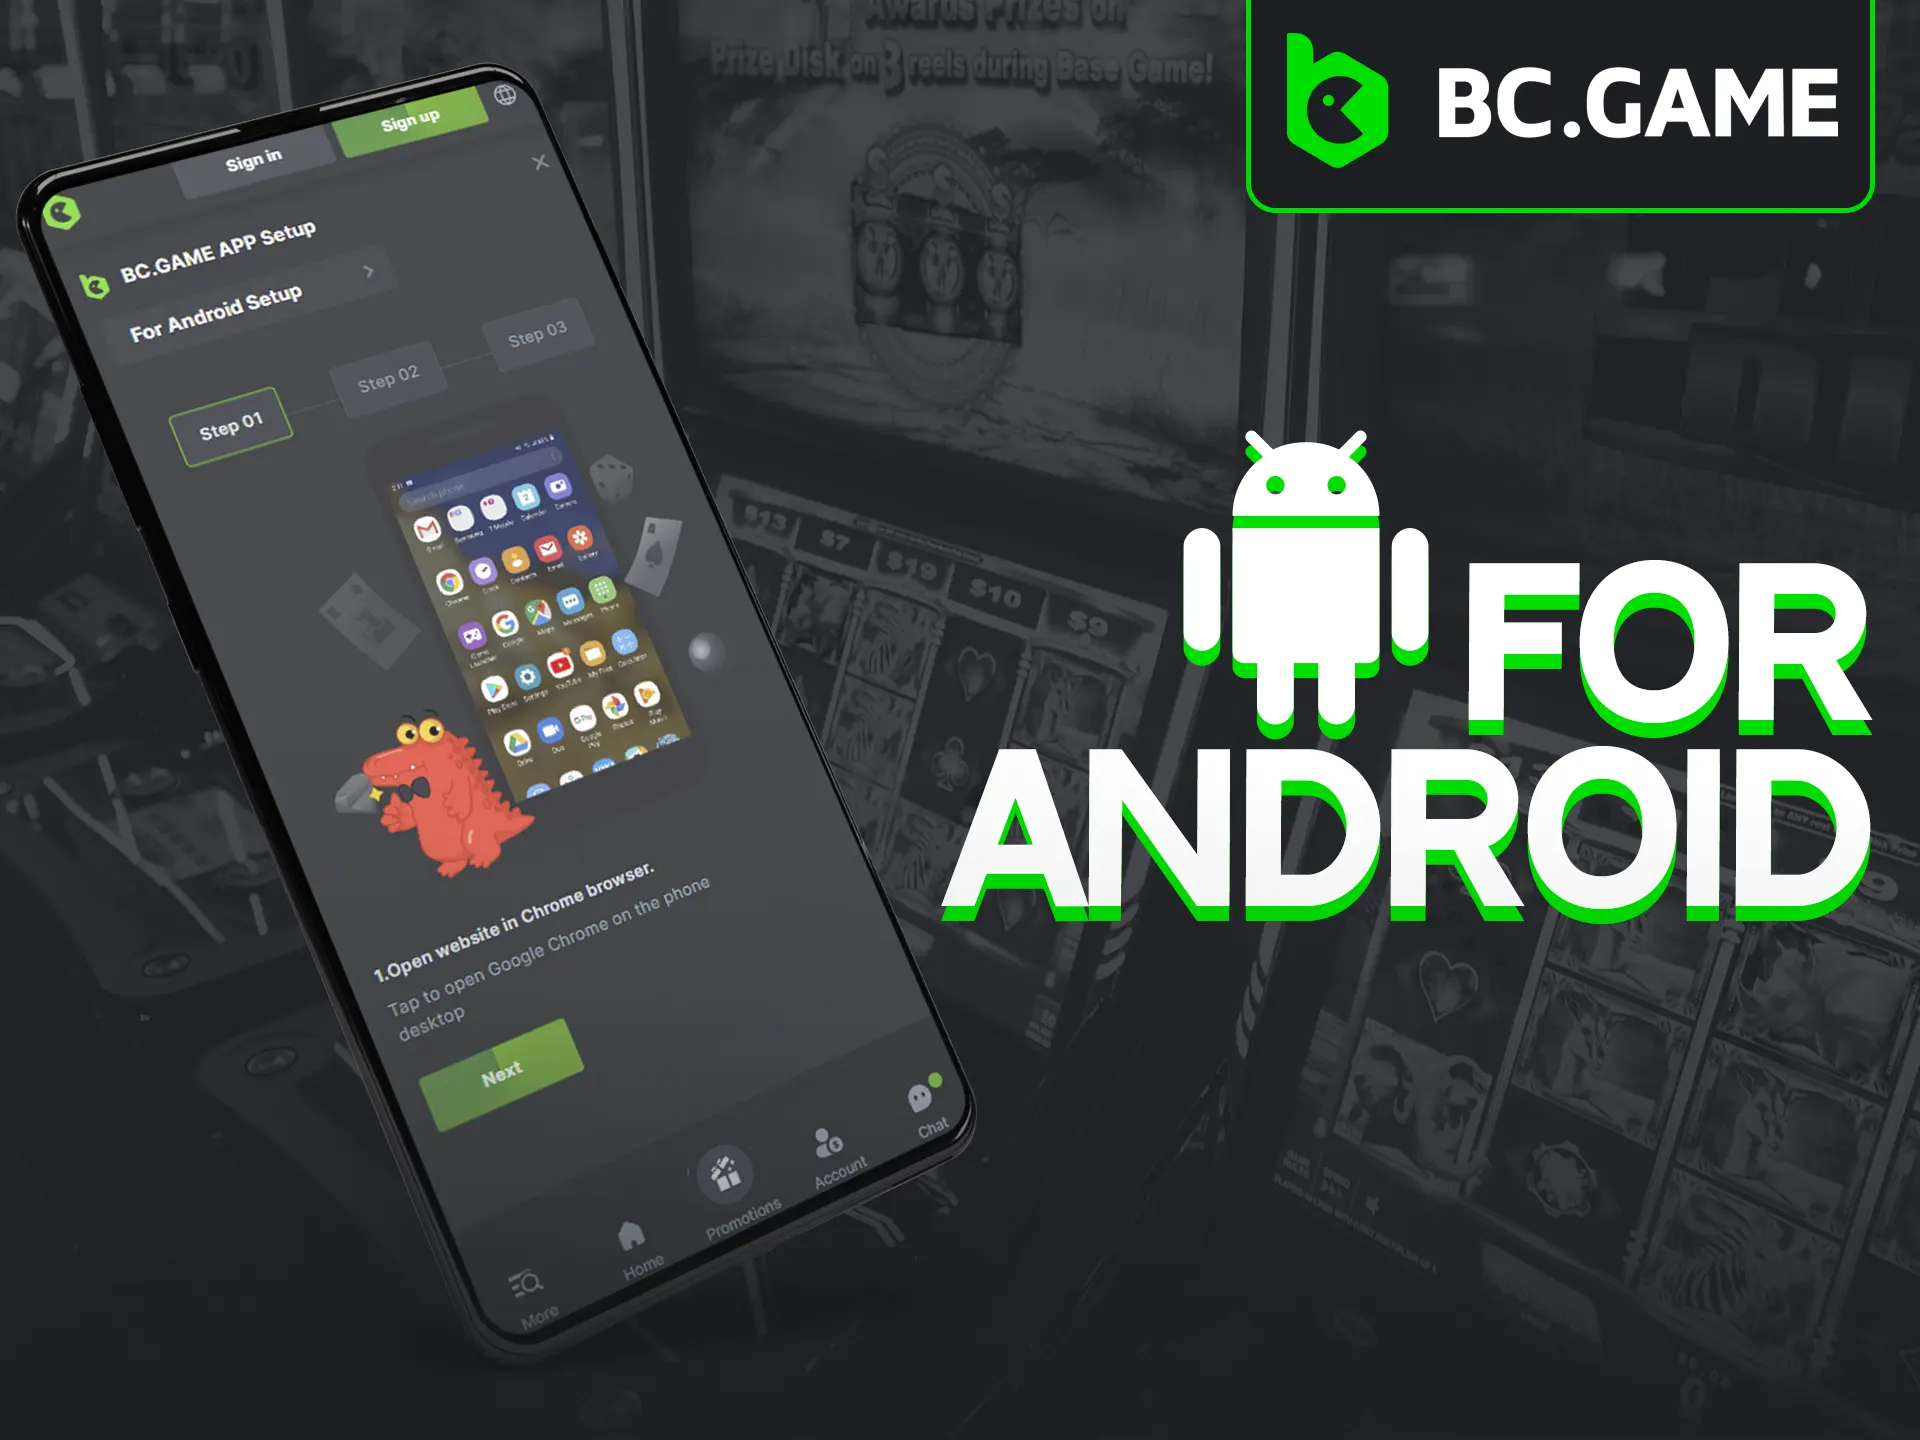 BC Game's Android app offers mobile gaming convenience.